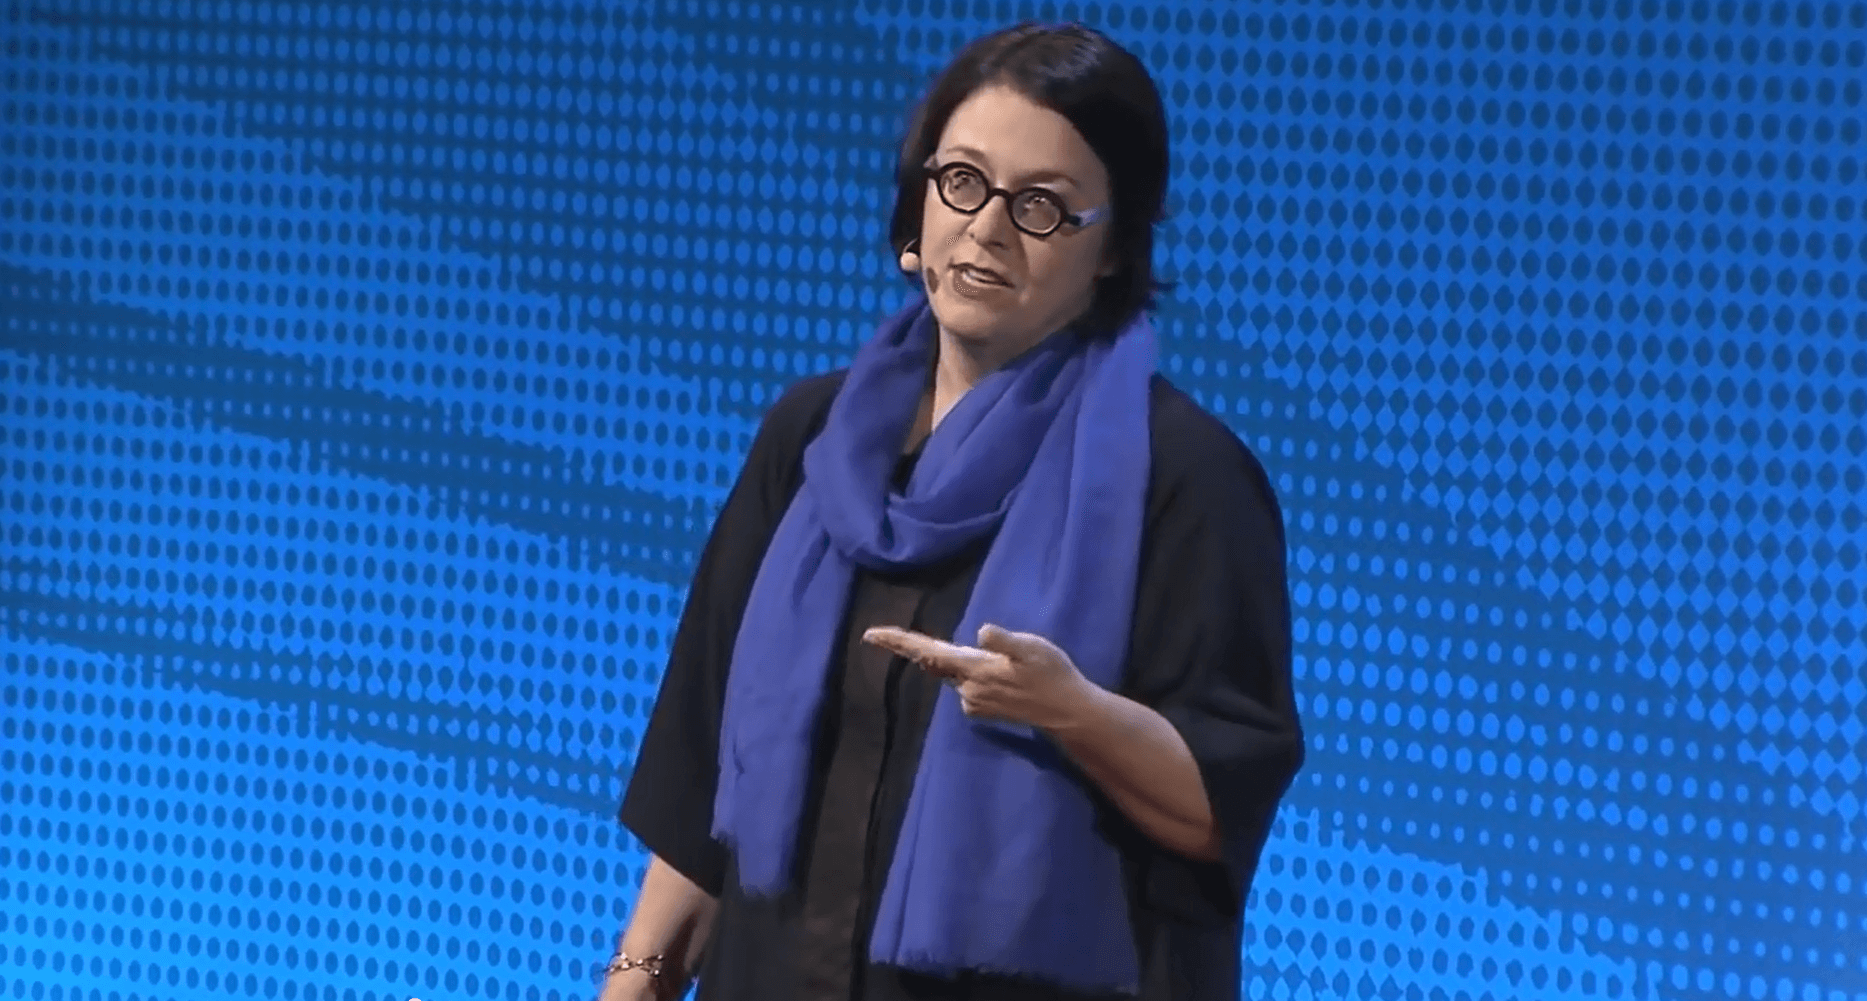 TED Talk—What Do We Do with All This Big Data?